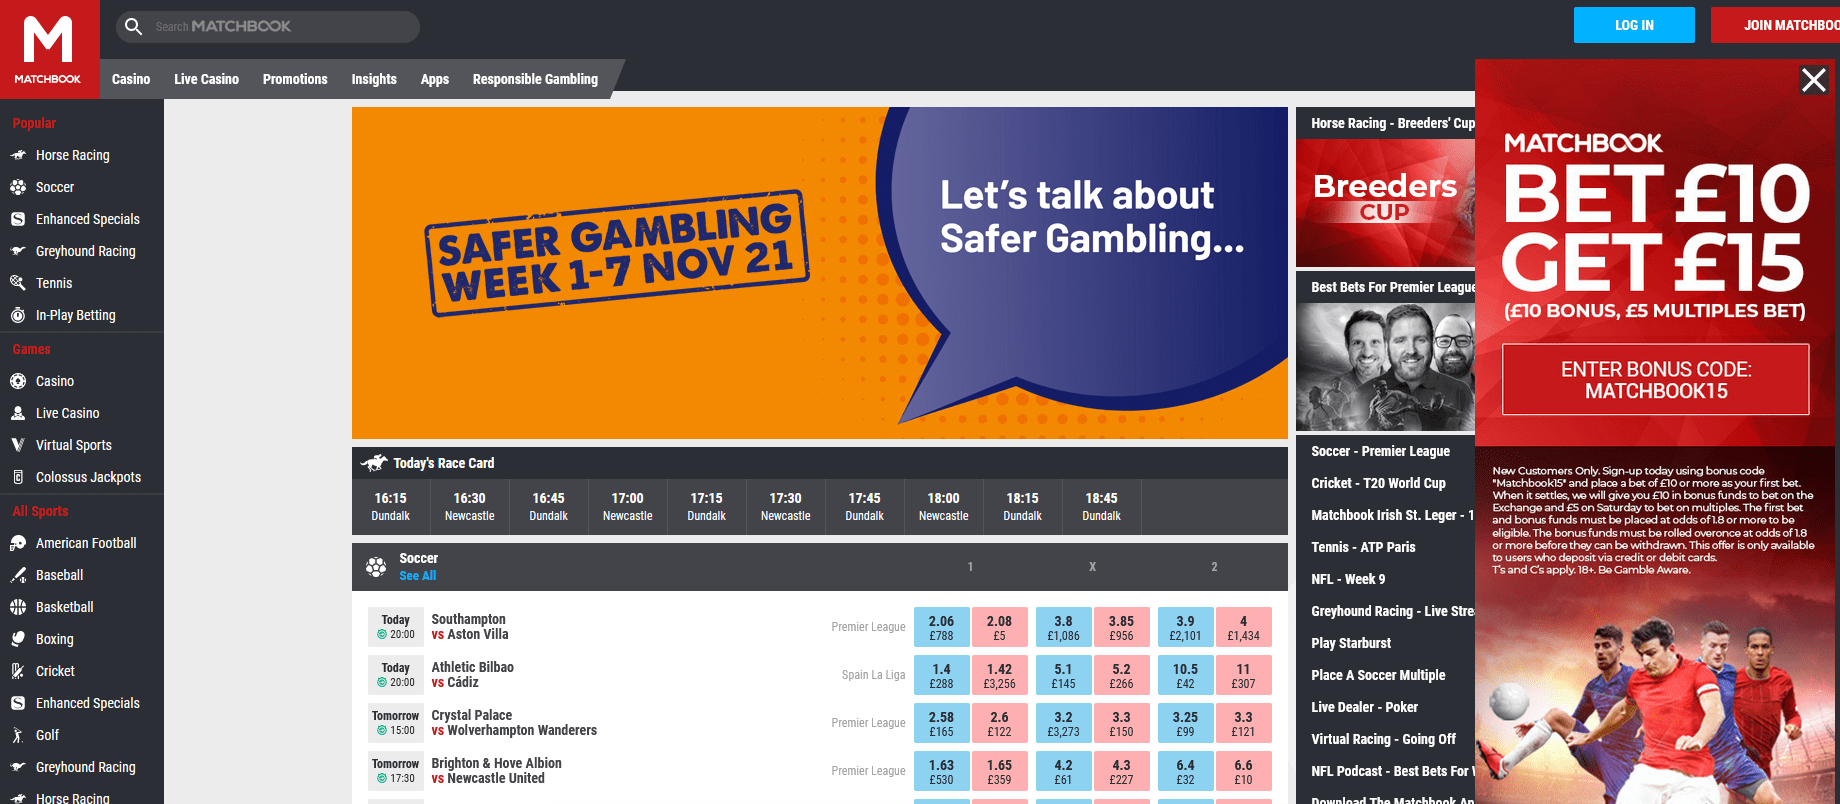 Matchbook - Exchange Betting Site with £15 Risk Free Bet